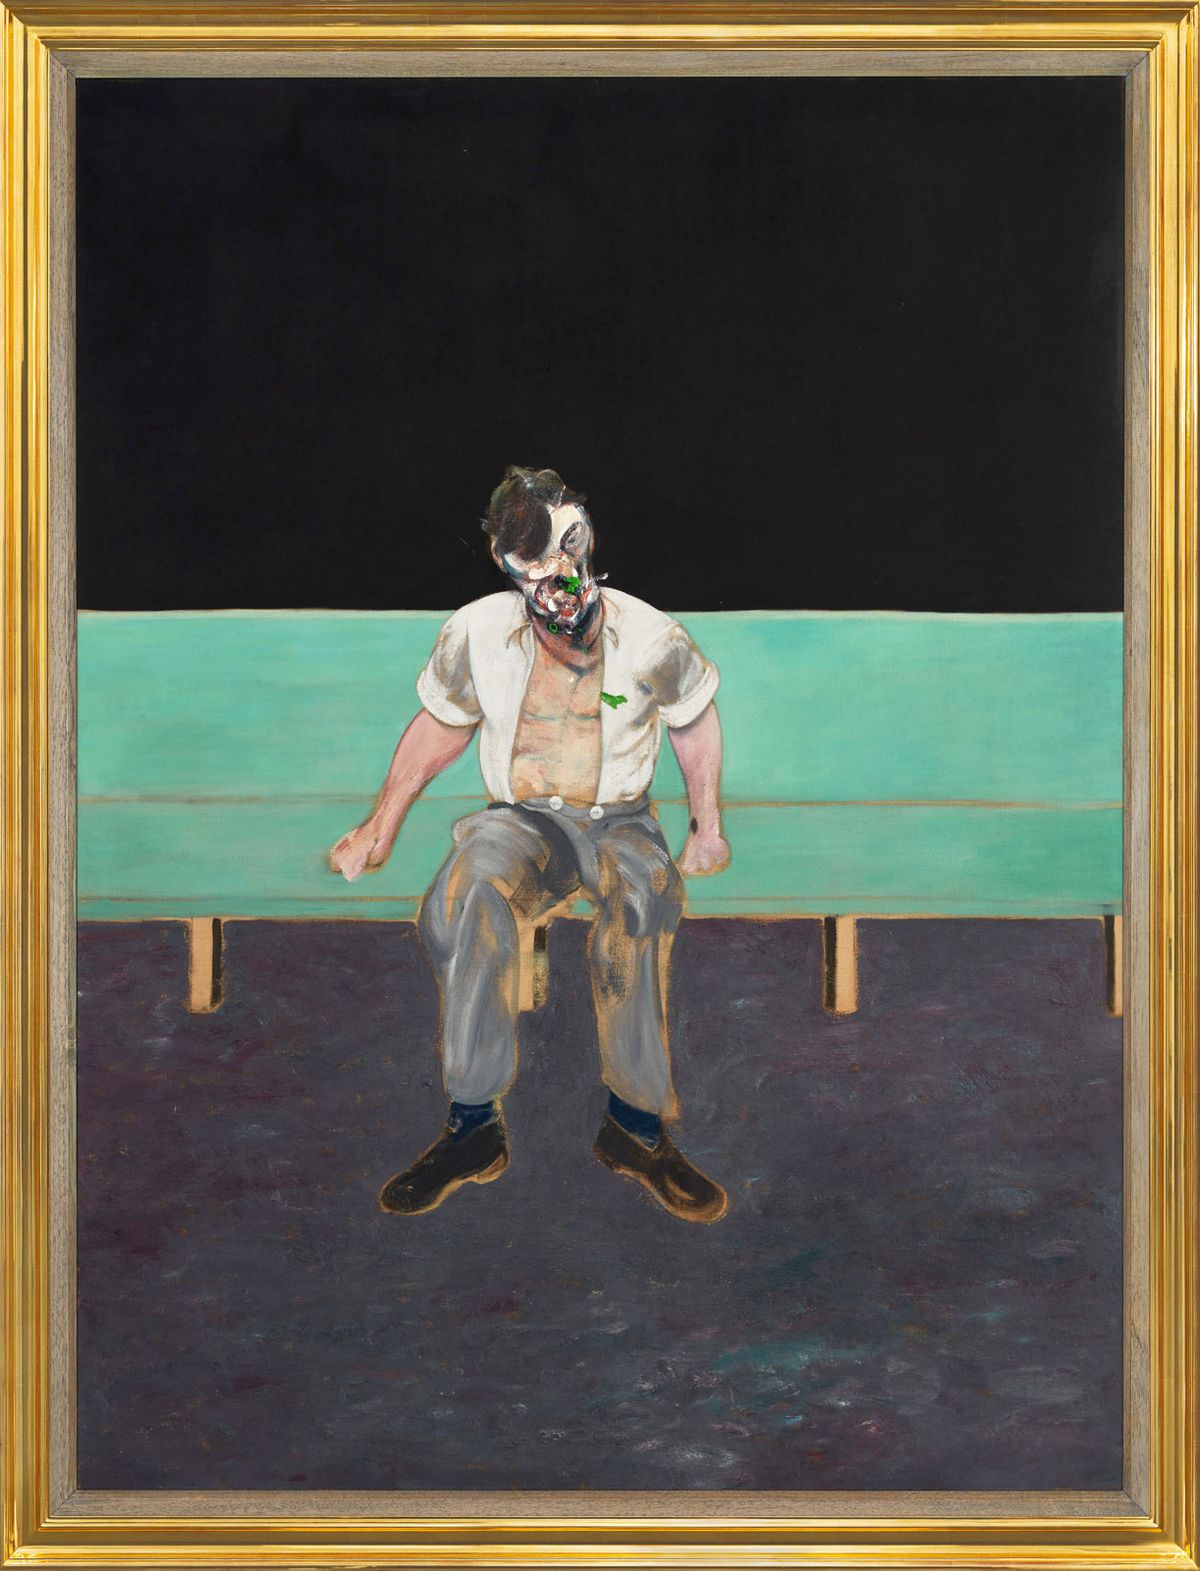 Francis Bacon's Study for Portrait of Lucian Freud (1964)